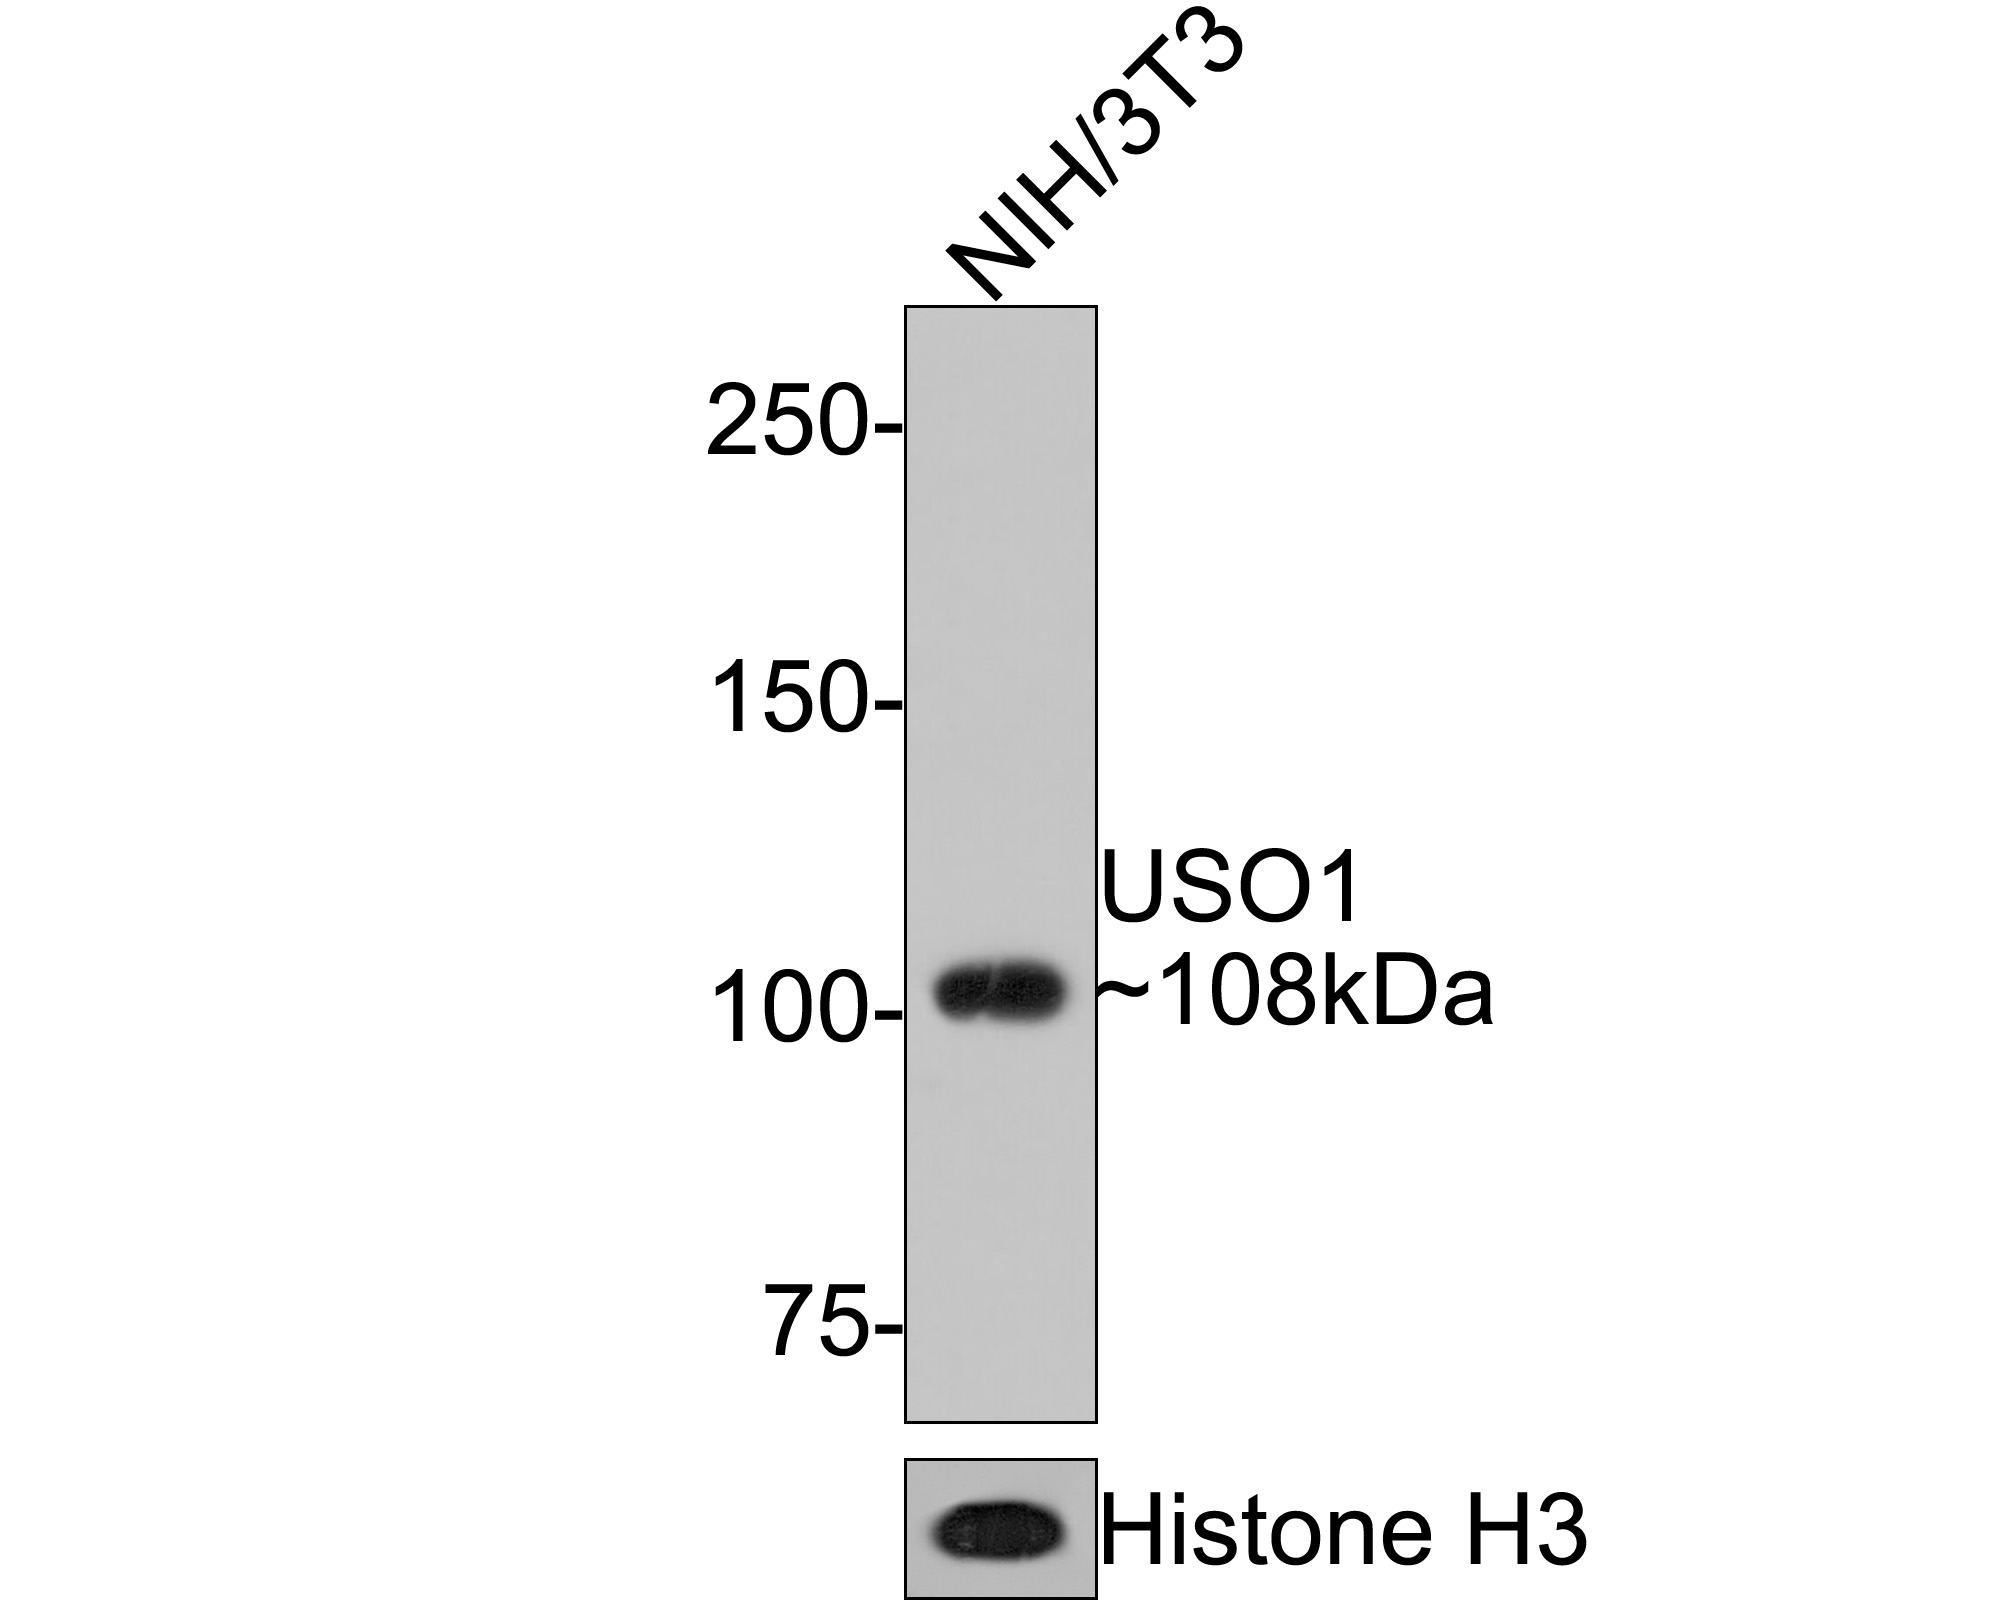 Western blot analysis of USO1 on NIH/3T3 cell lysates with Rabbit anti-USO1 antibody (HA721060) at 1/1,000 dilution.<br />
<br />
Lysates/proteins at 10 µg/Lane.<br />
<br />
Predicted band size: 108 kDa<br />
Observed band size: 108 kDa<br />
<br />
Exposure time: 1 minute;<br />
<br />
6% SDS-PAGE gel.<br />
<br />
Proteins were transferred to a PVDF membrane and blocked with 5% NFDM/TBST for 1 hour at room temperature. The primary antibody (HA721060) at 1/1,000 dilution was used in 5% NFDM/TBST at room temperature for 2 hours. Goat Anti-Rabbit IgG - HRP Secondary Antibody (HA1001) at 1:300,000 dilution was used for 1 hour at room temperature.